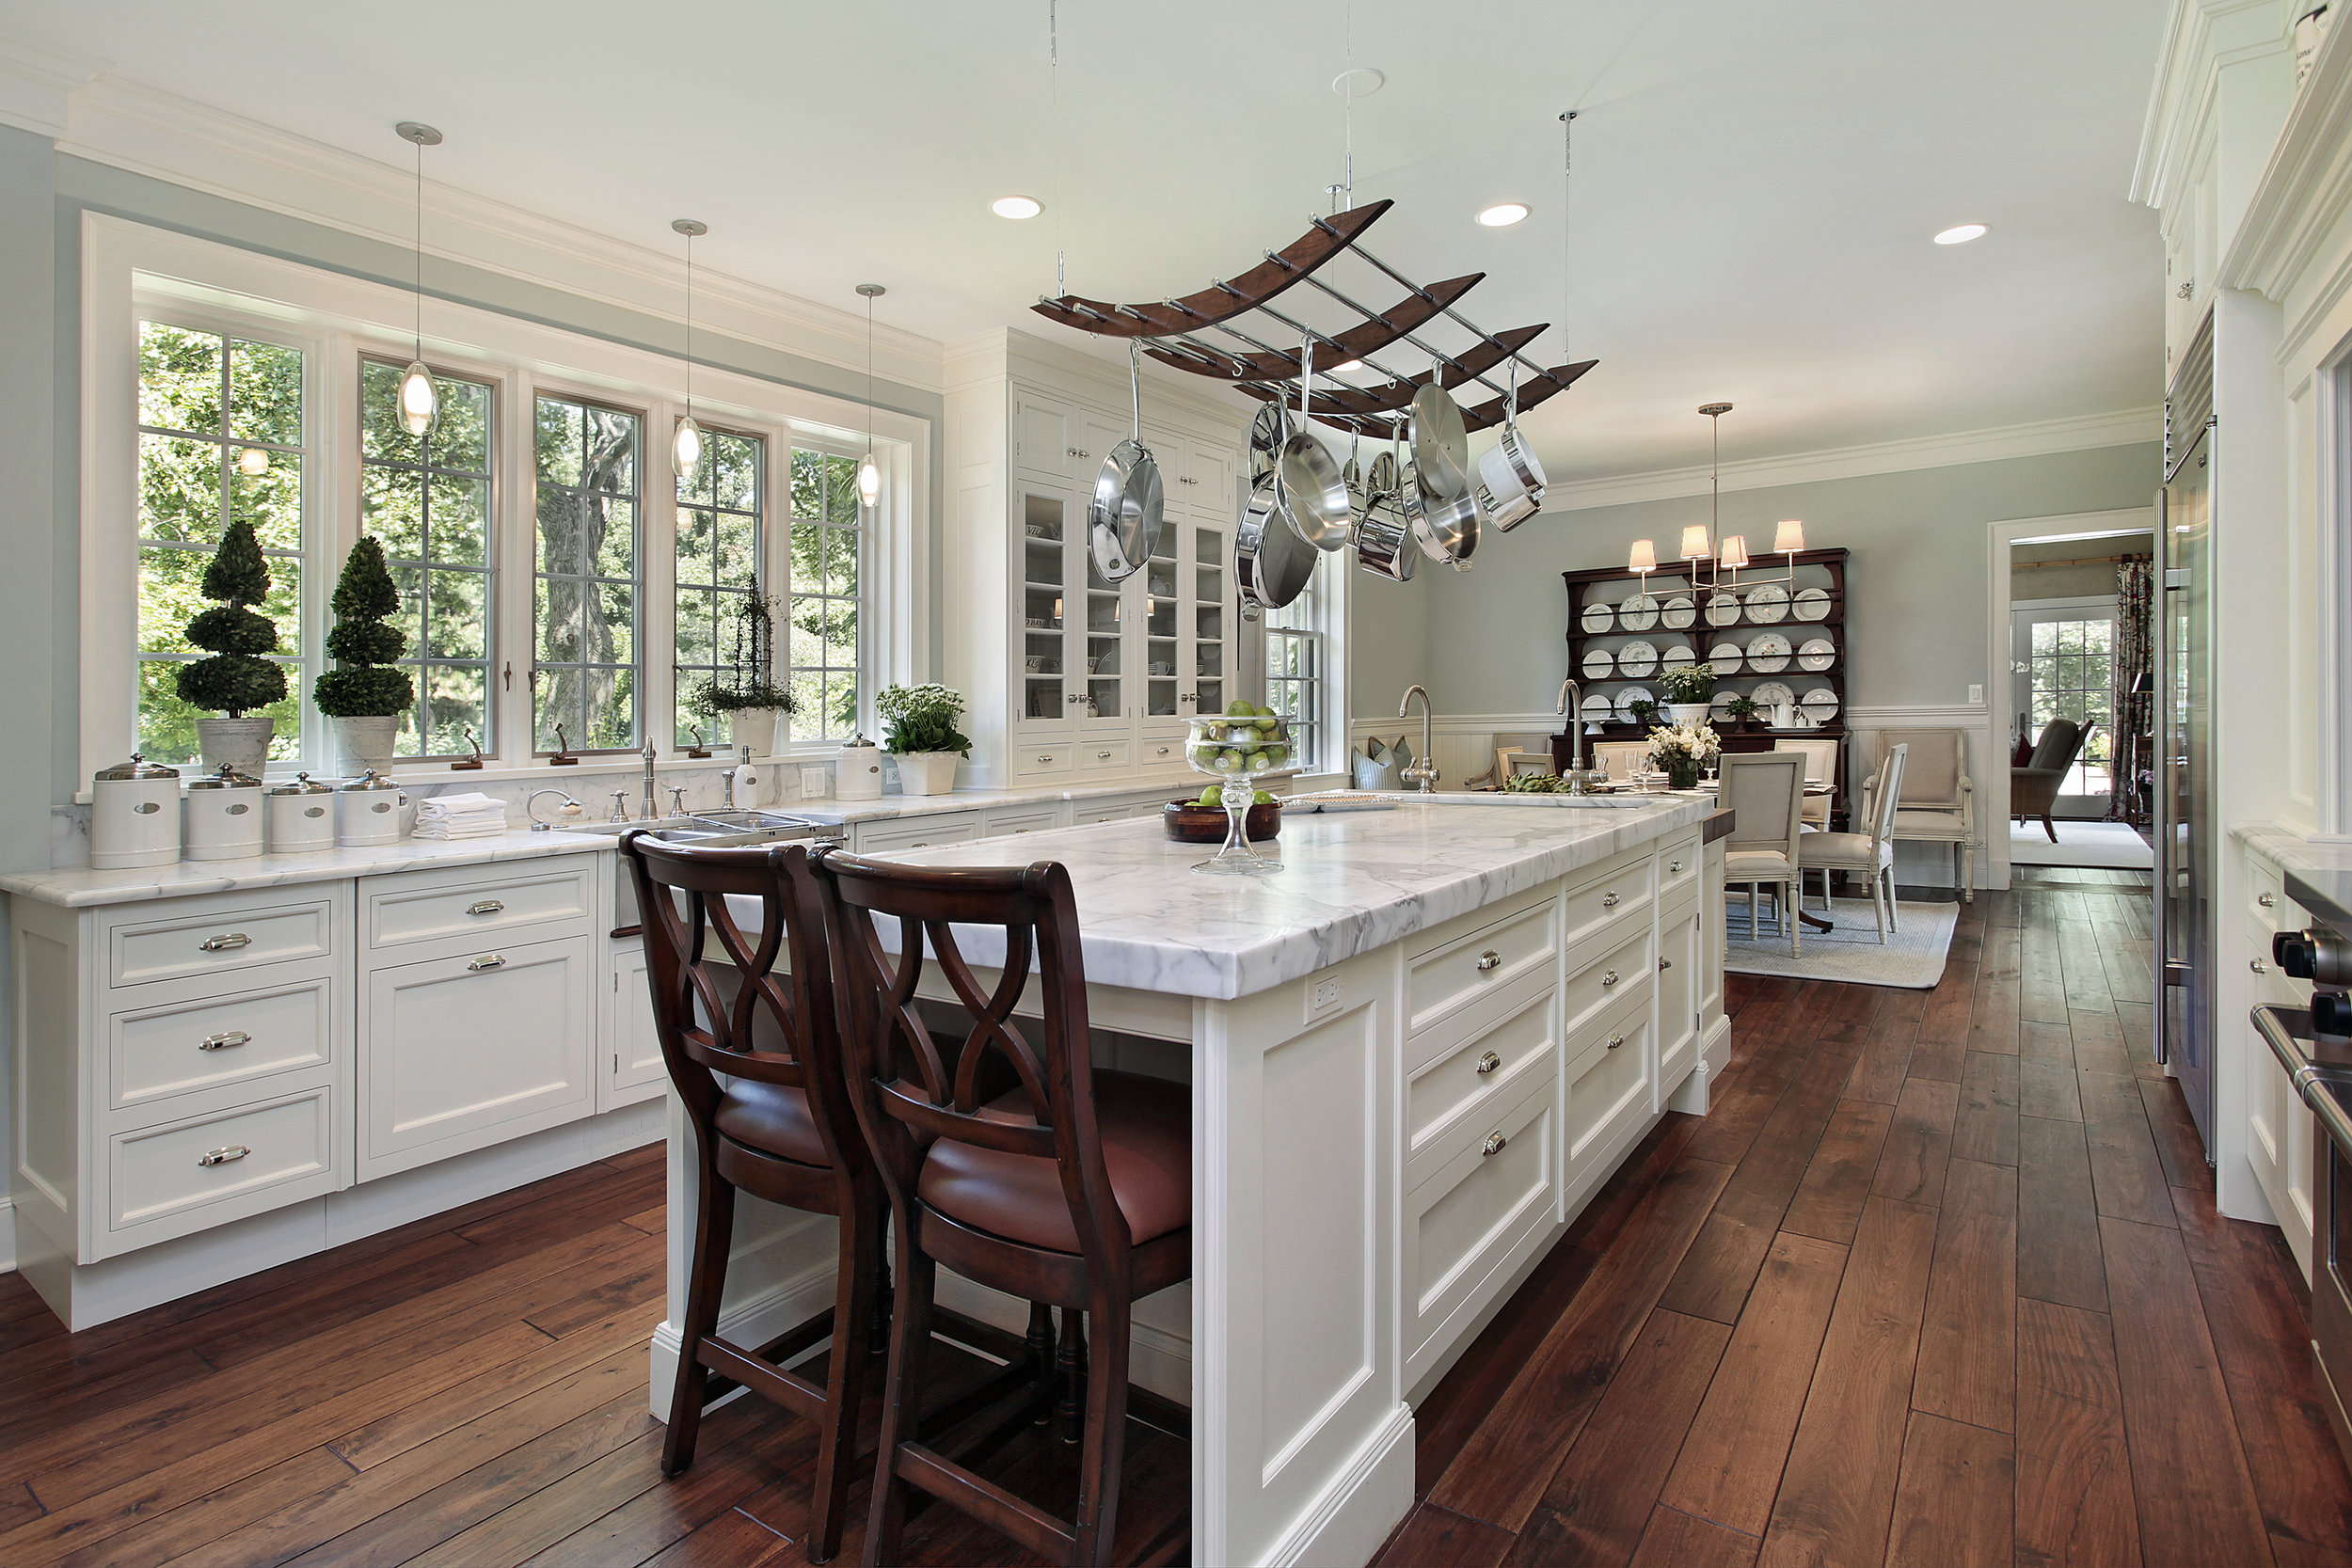 bigstock-Kitchen-in-luxury-home-with-wh-16568375.jpg